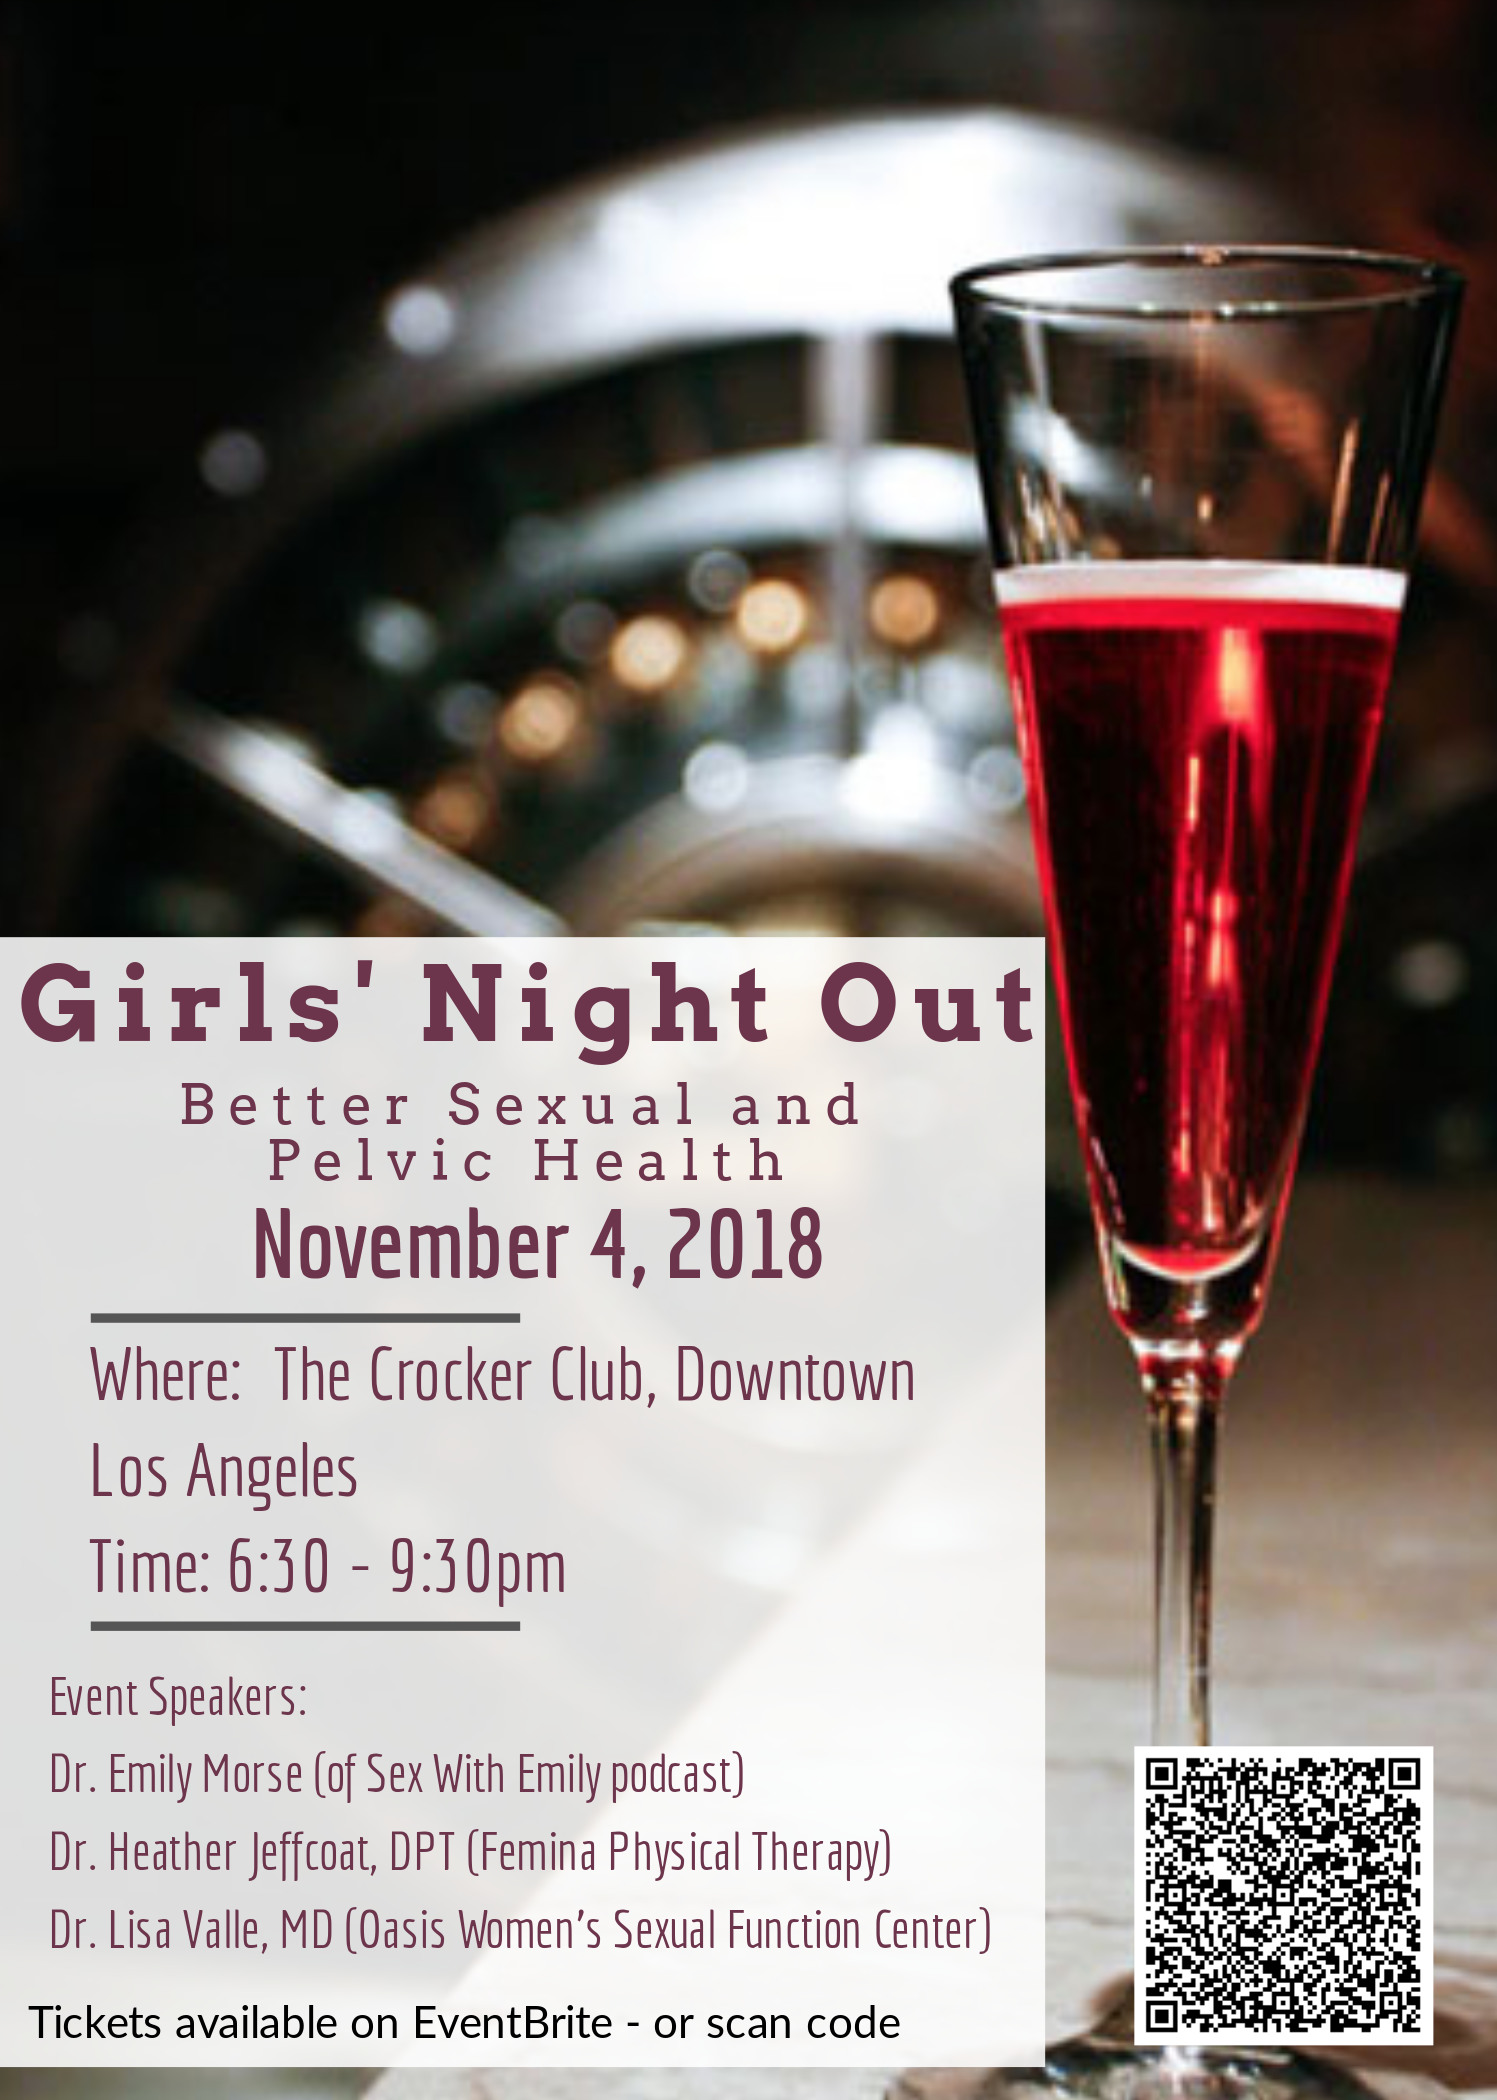 christina godinez recommends Ladies Night Out Sex